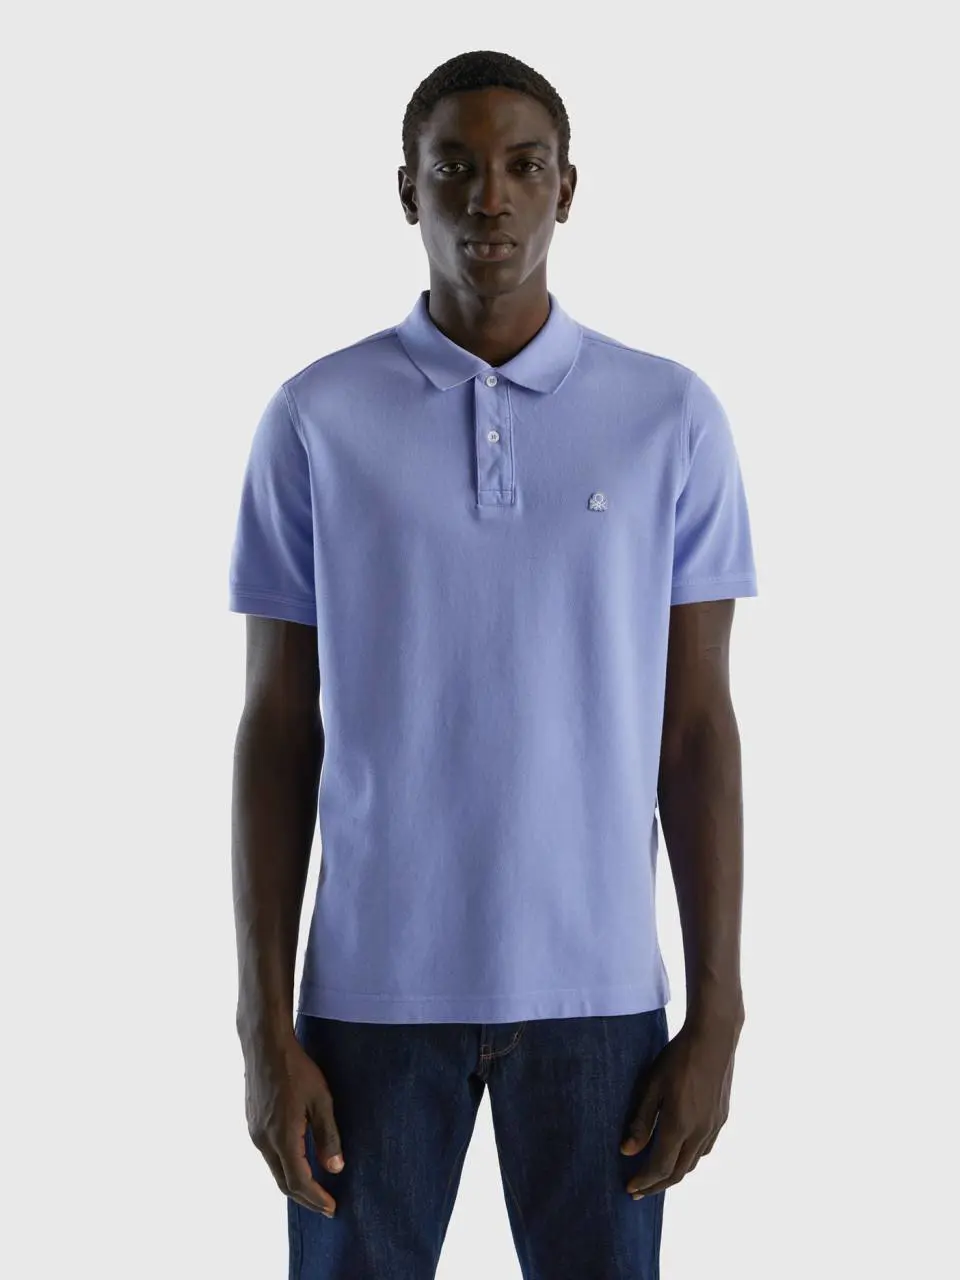 Benetton periwinkle violet regular fit polo. 1